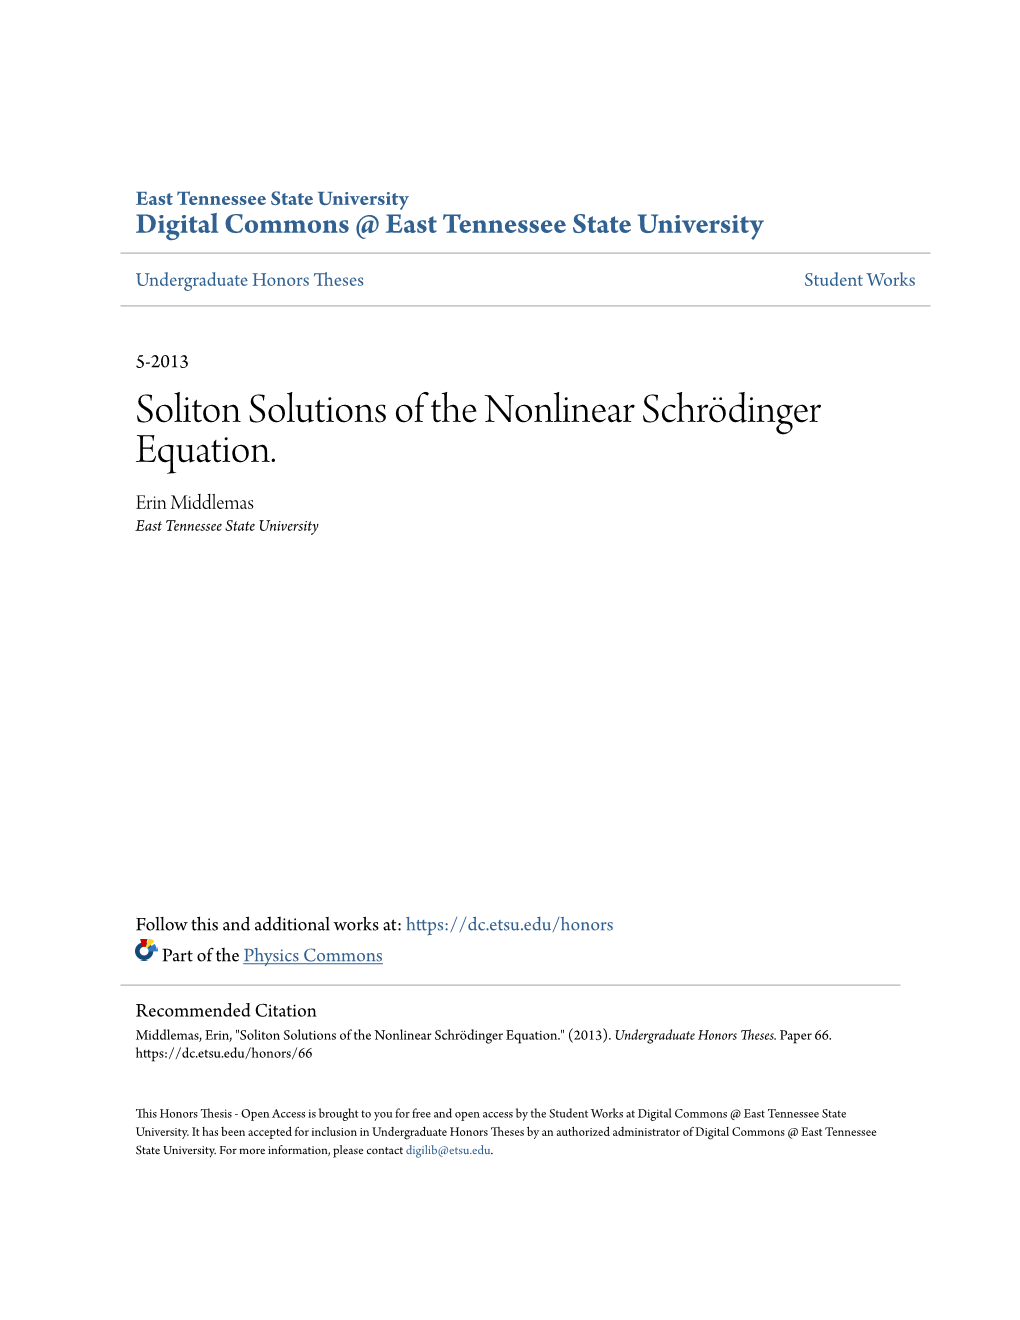 Soliton Solutions of the Nonlinear Schrödinger Equation. Erin Middlemas East Tennessee State University